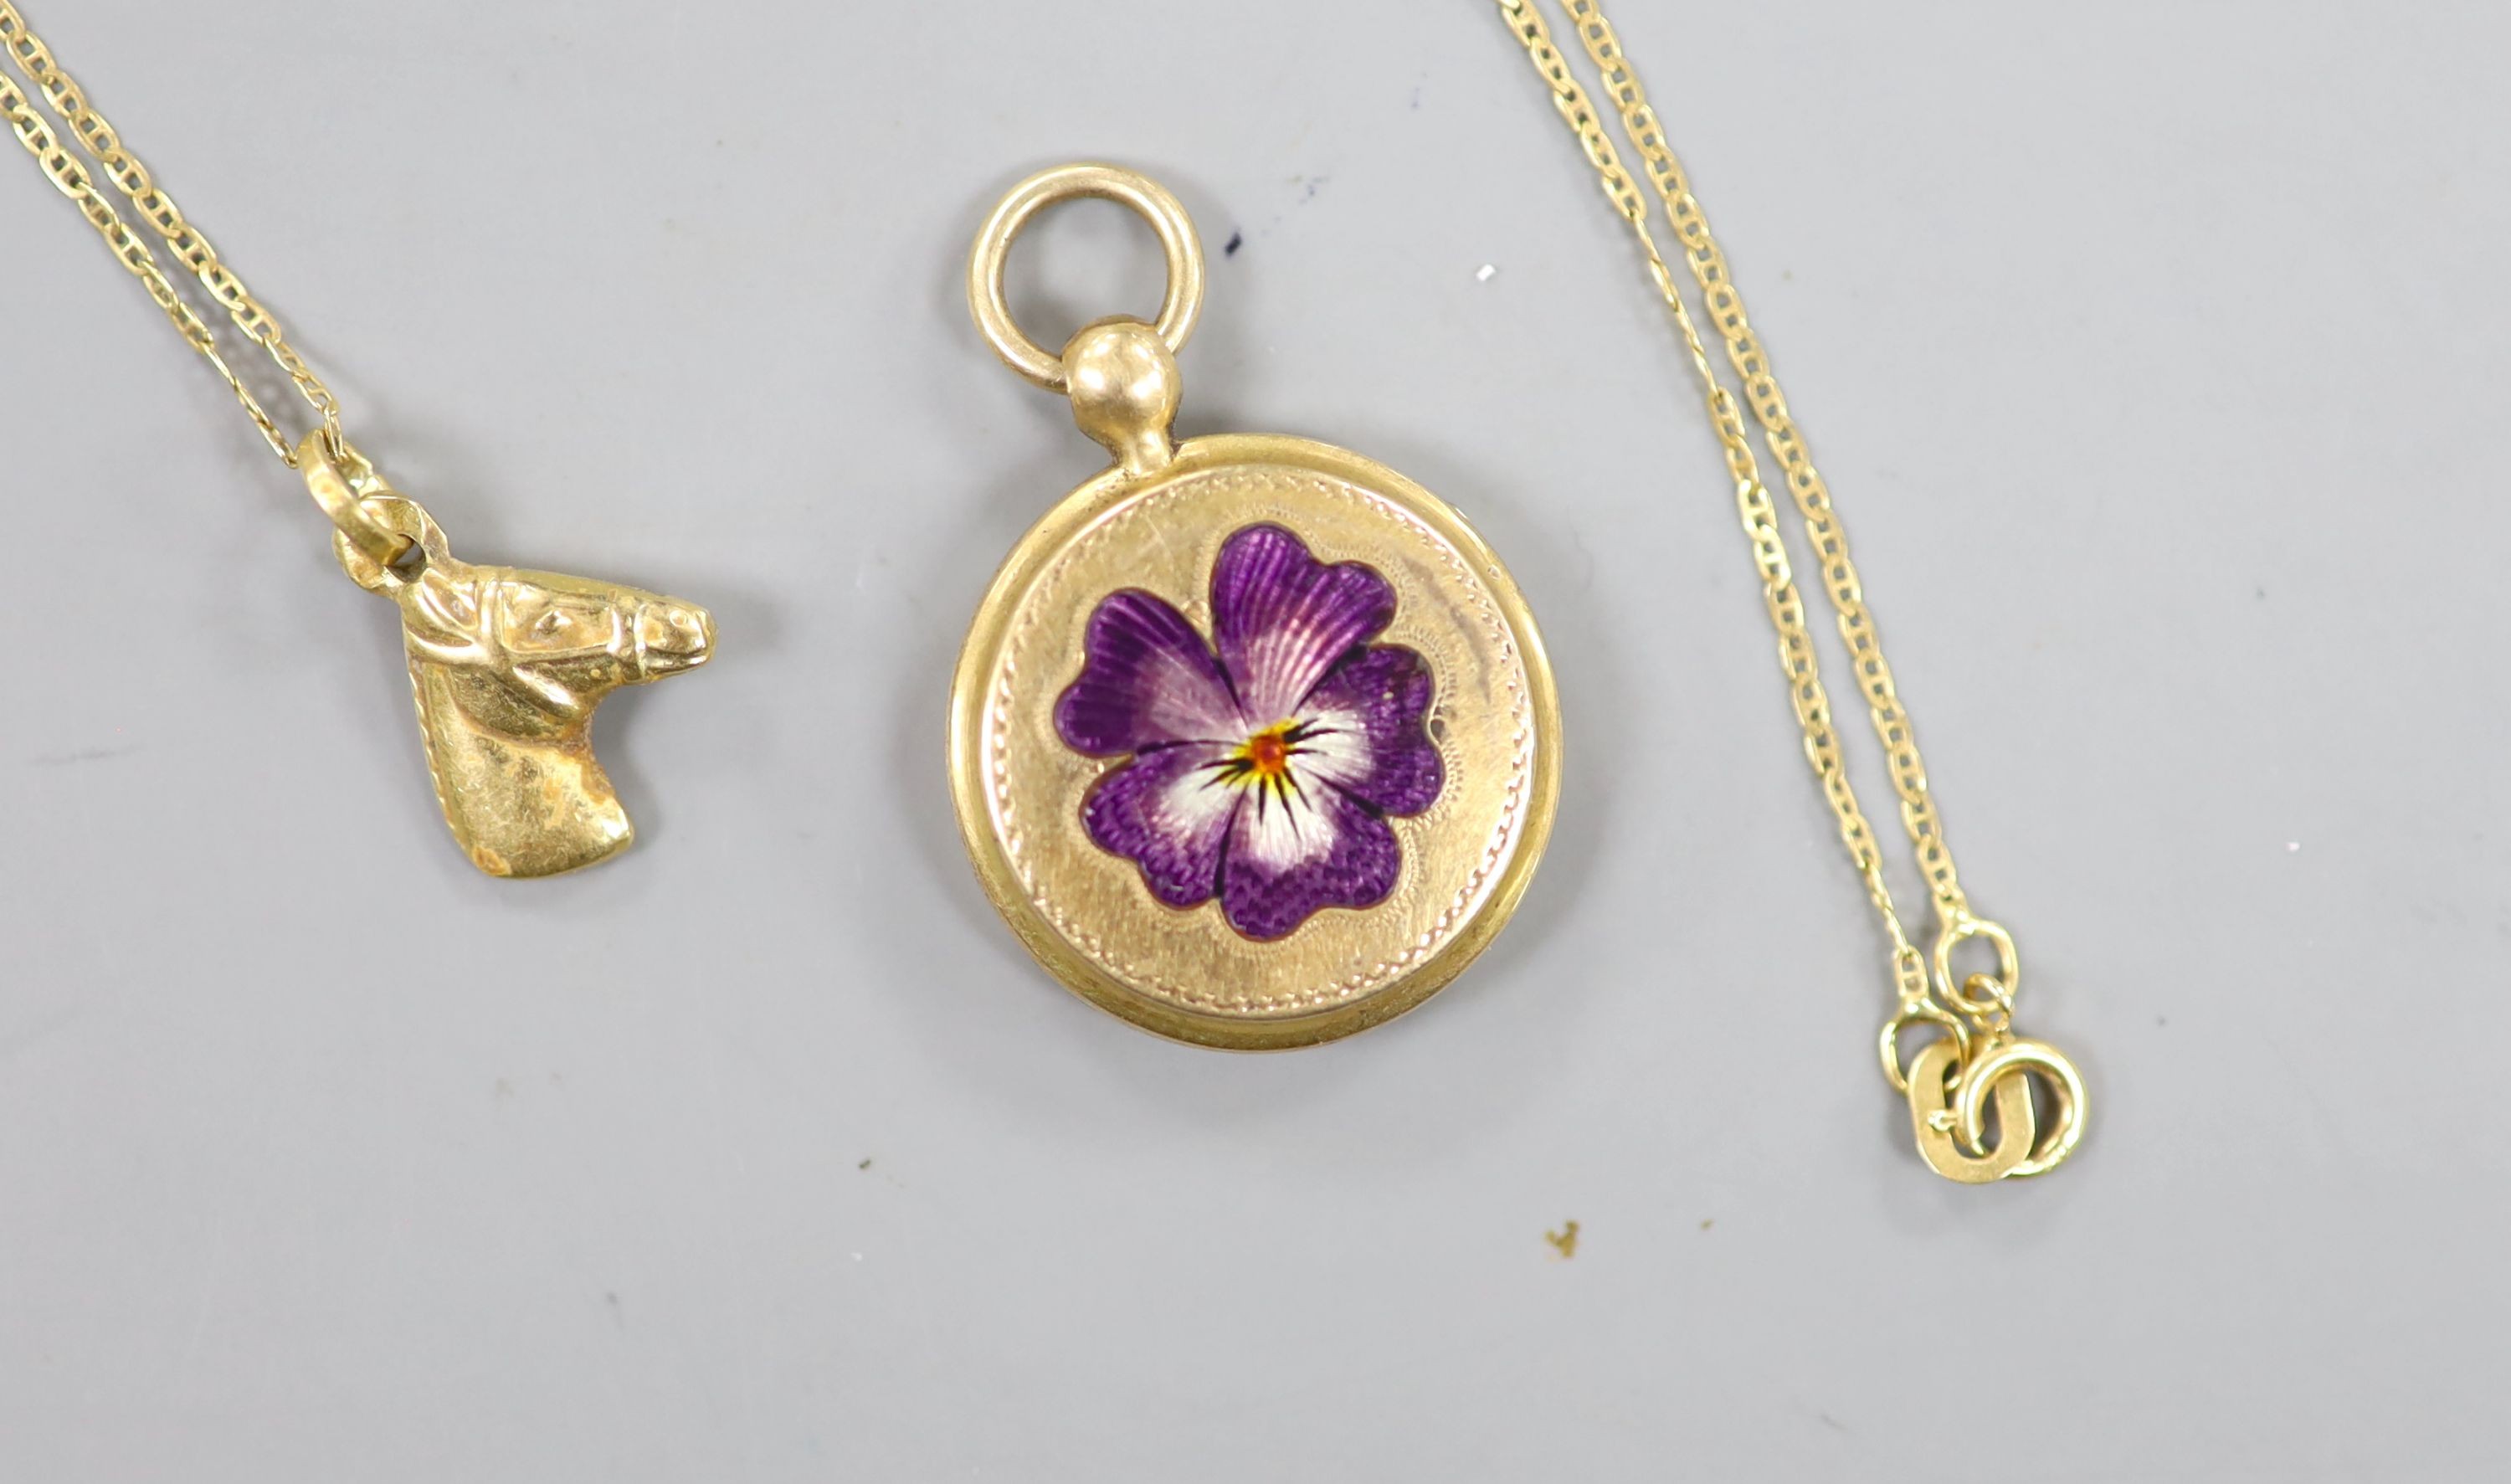 A small early 20th century yellow metal and enamel pendant locket, 18mm, together with a very small horse head pendant on an 18kt fine link chain, gross 5.3 grams.